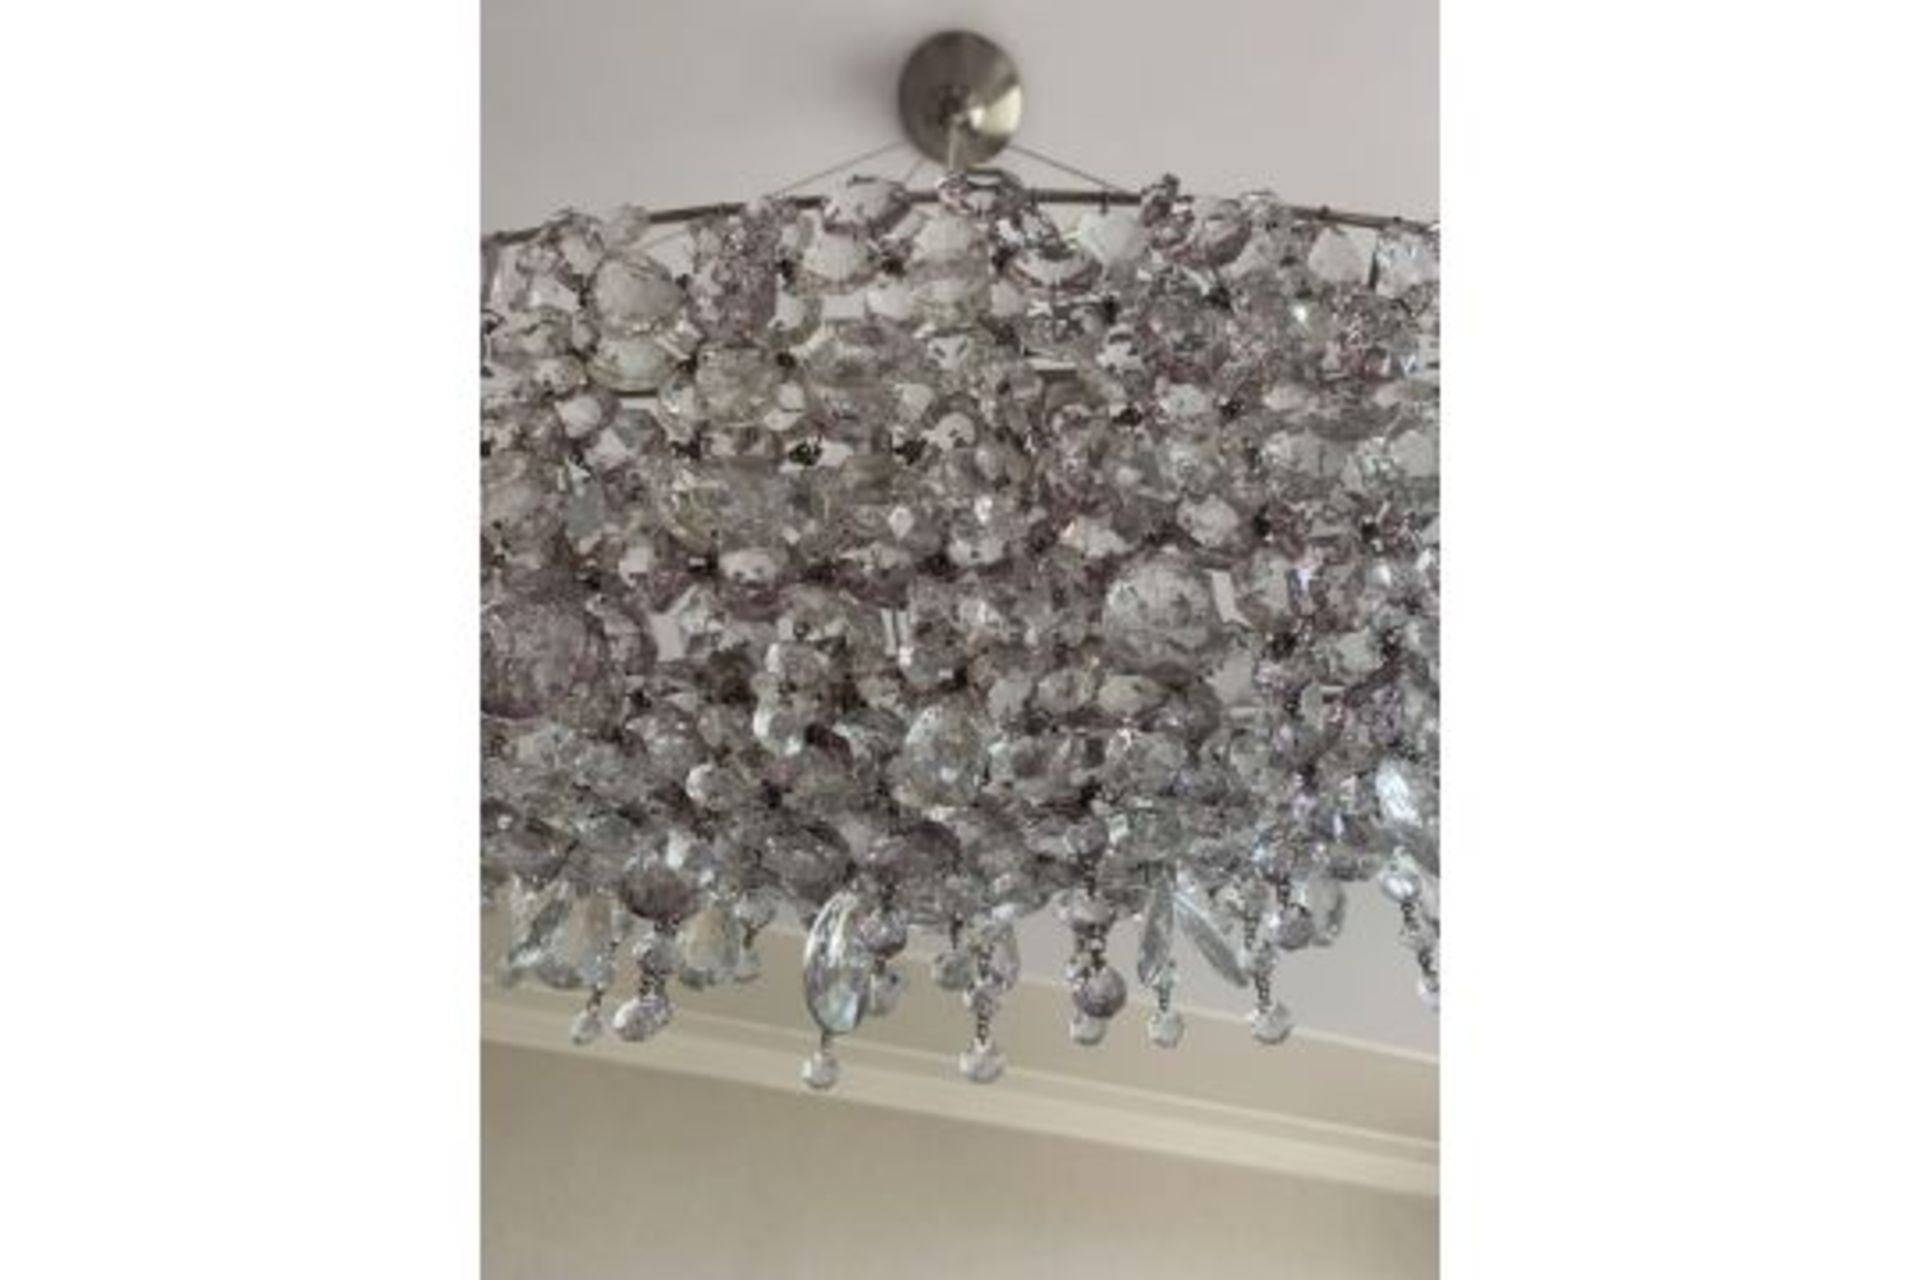 Lolli E Memmoli Ugolino Chandelier Crystals Woven Together Like Fabric, Hung From A Two- - Bild 3 aus 3